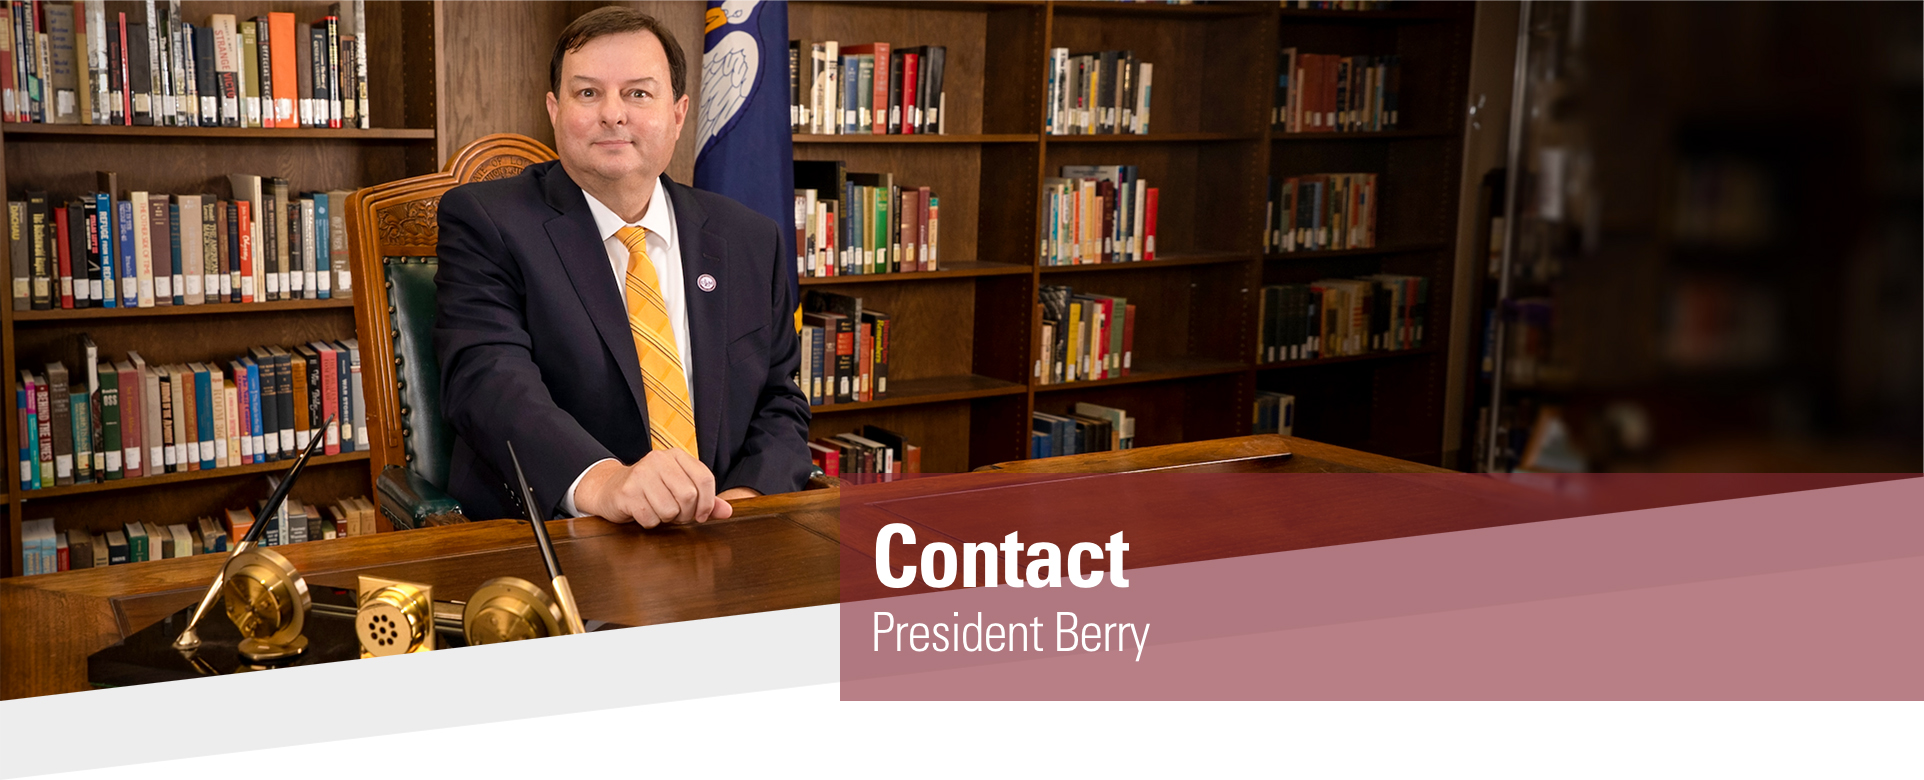 Contact President Berry